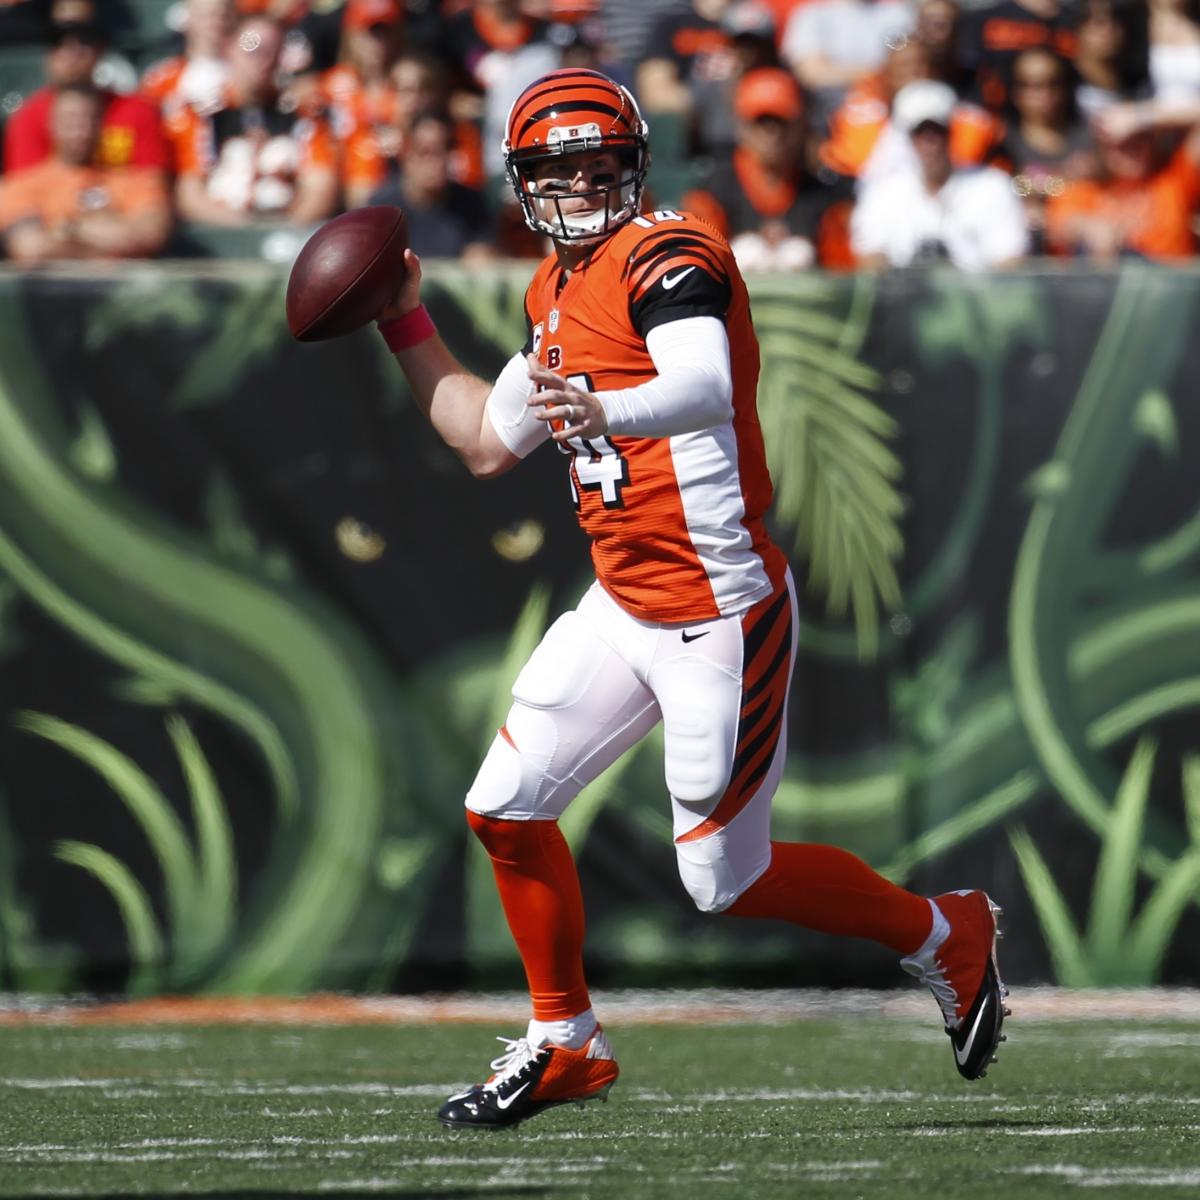 Chiefs vs. Bengals Score and Twitter Reaction from 2015 Regular Season